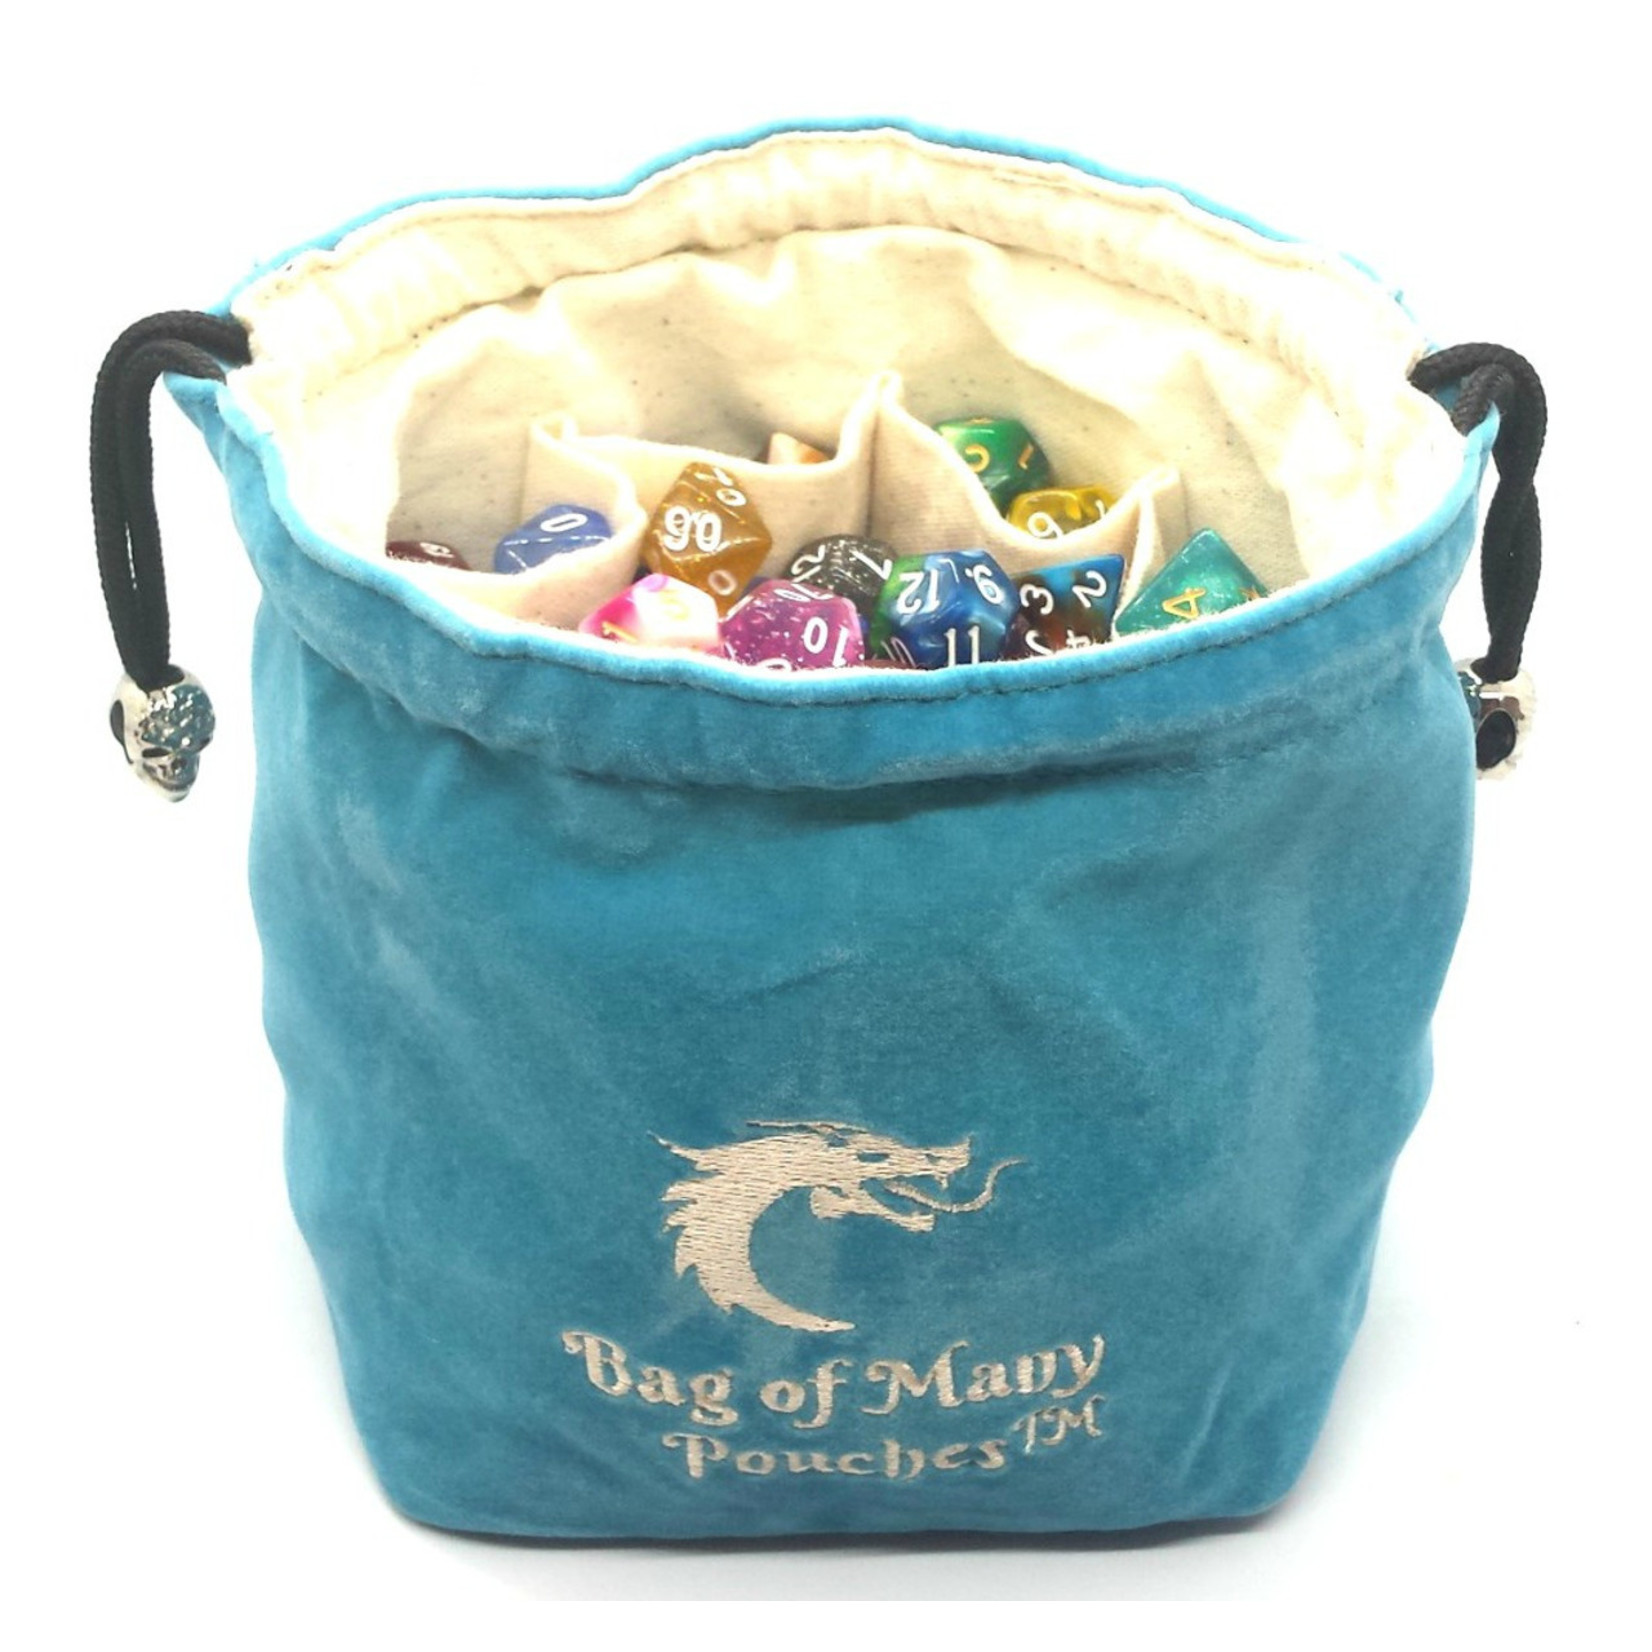 Old School Bag of Many Pouches RPG DnD Dice Bag: Teal